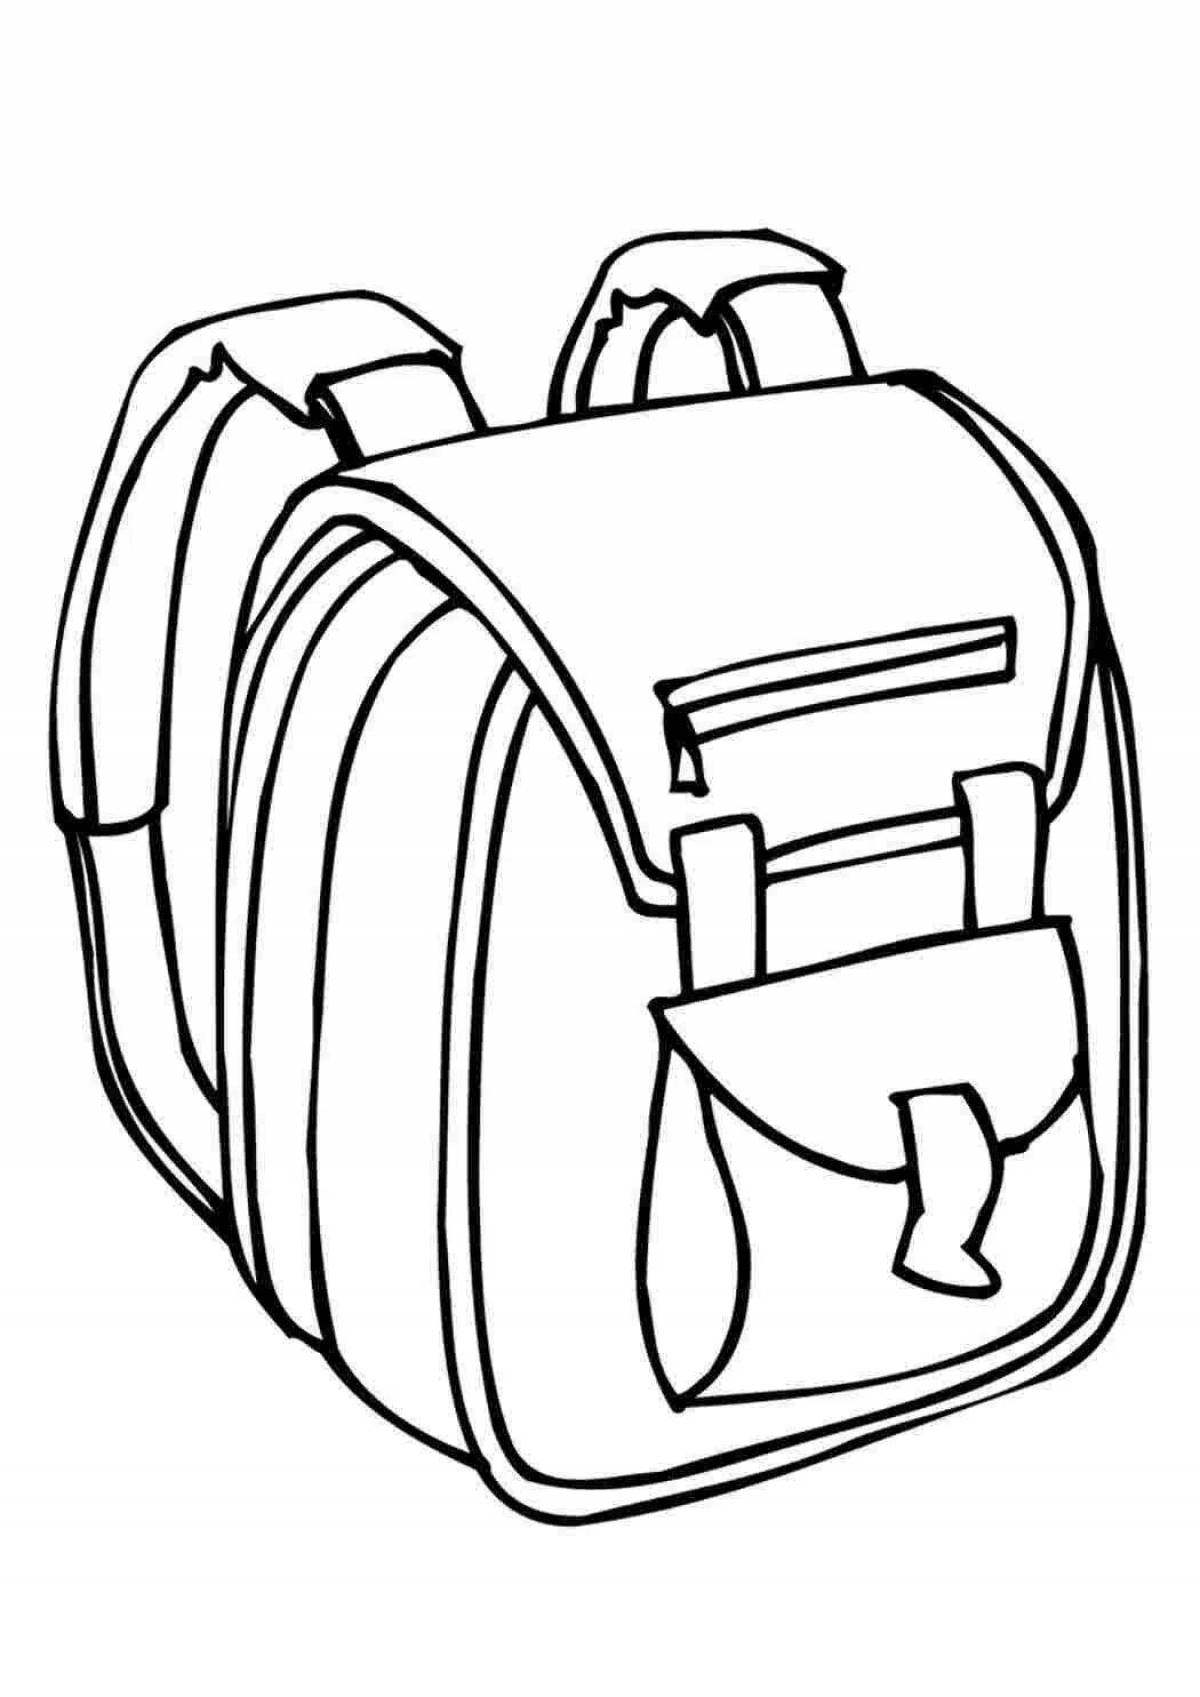 Colouring awesome backpack